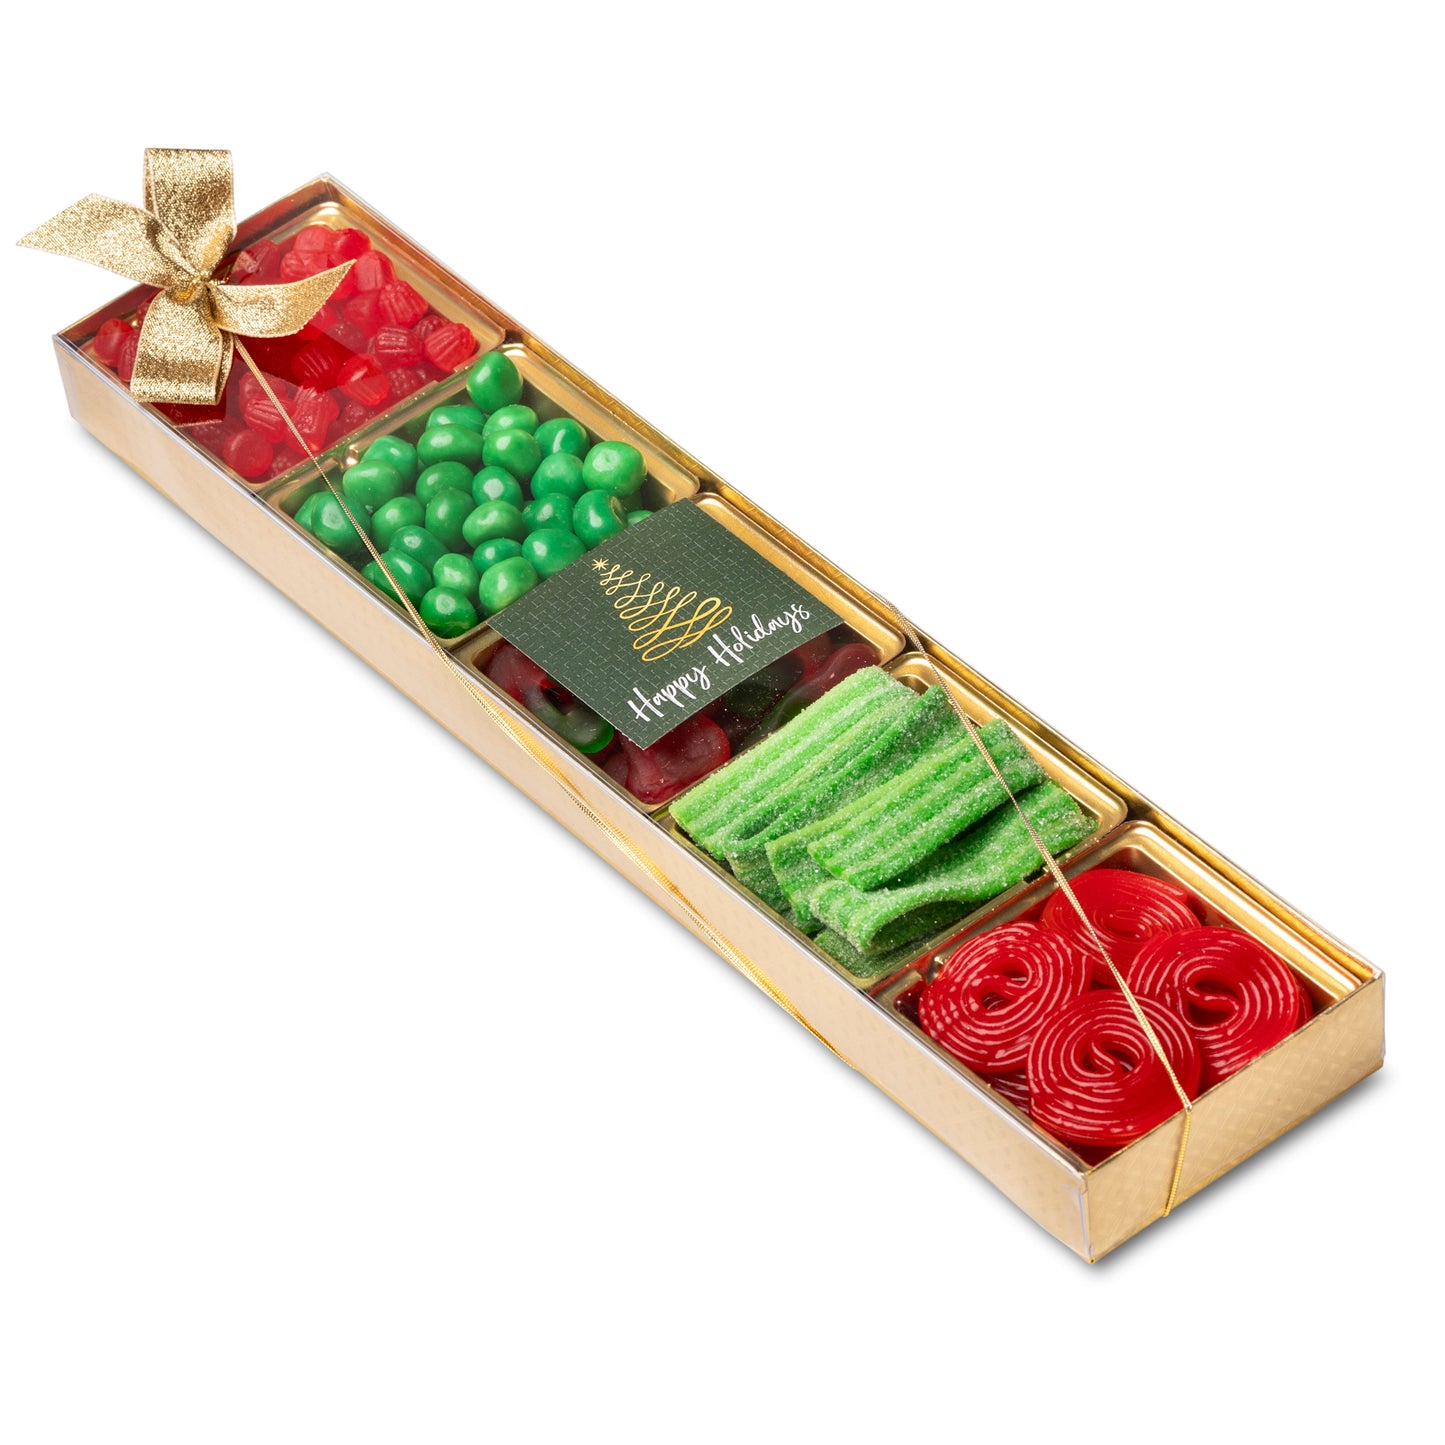 Long 5 Section Tray, Christmas